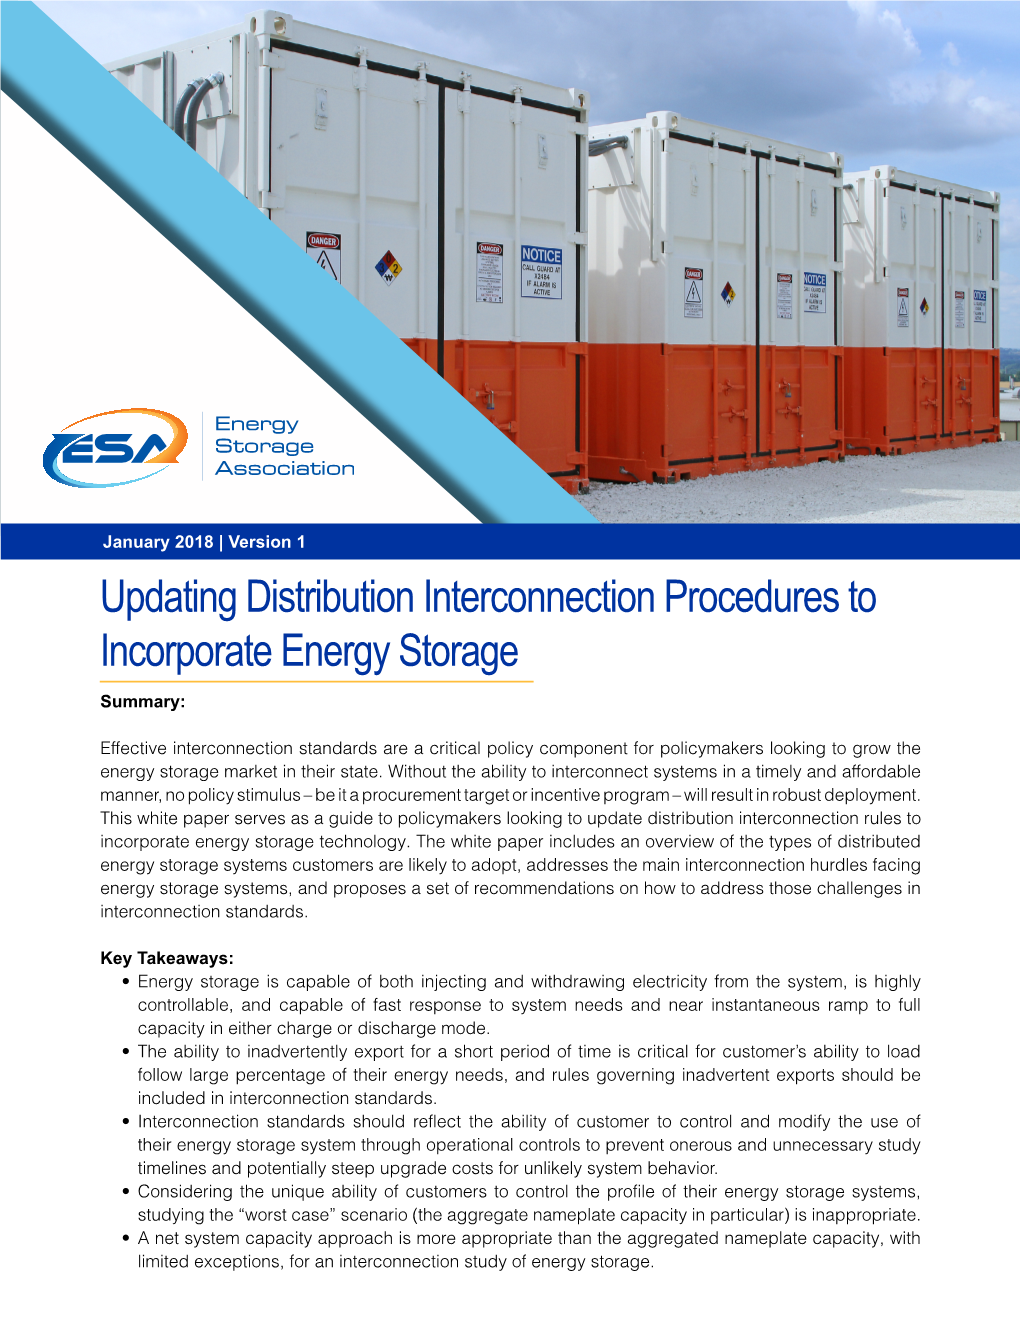 Updating Distribution Interconnection Procedures to Incorporate Energy Storage Summary